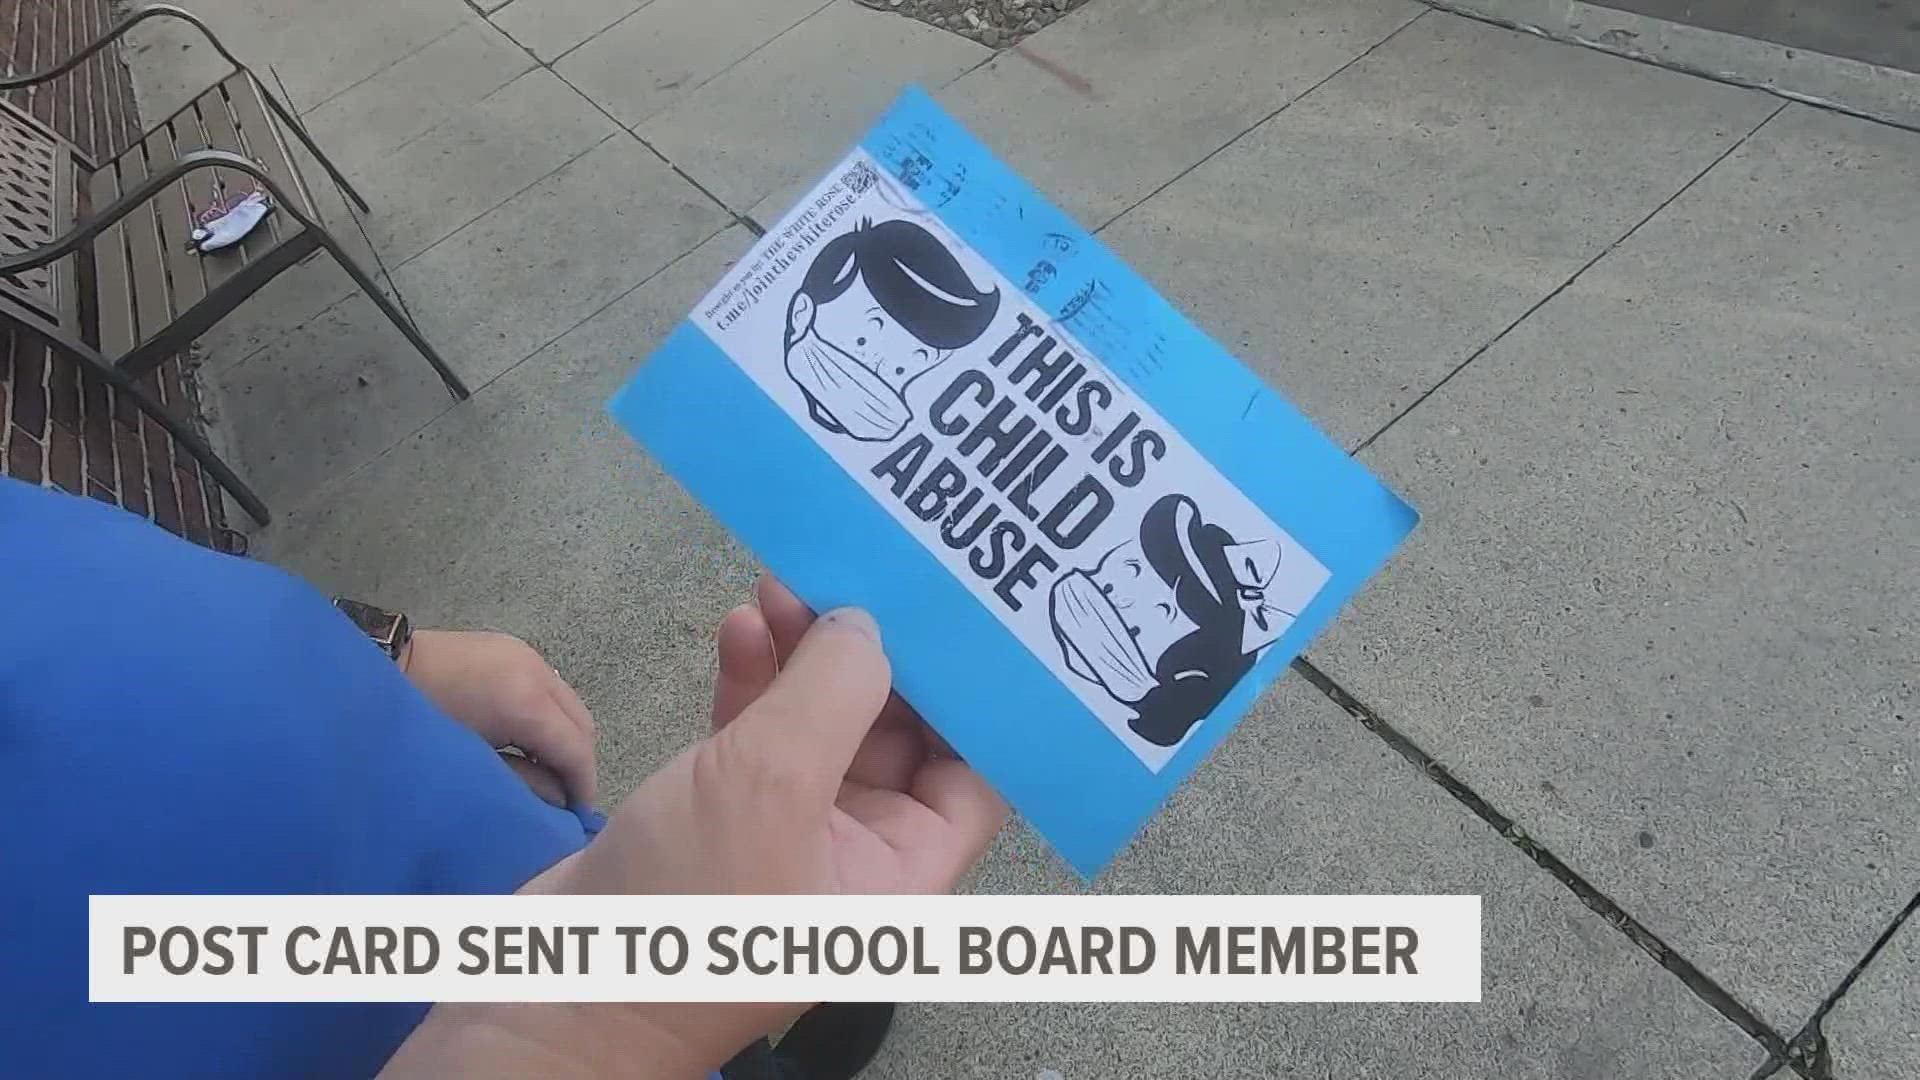 The postcard appeared to be mailed to Ankeny School Board member Amy Tagliareni from Connecticut.